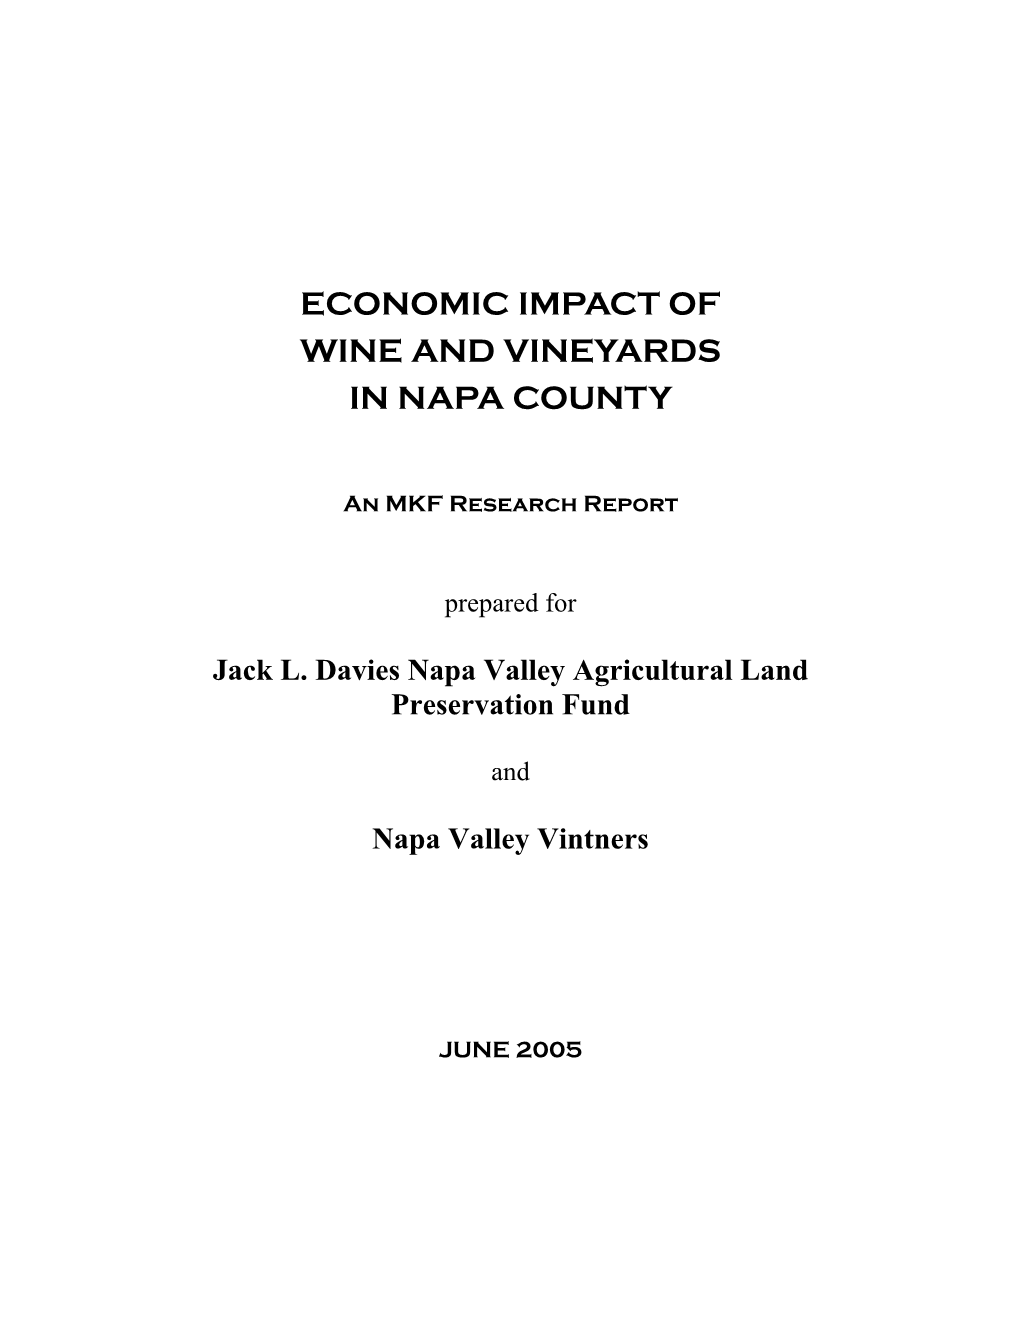 Economic Impact of Wine and Vineyards in Napa County